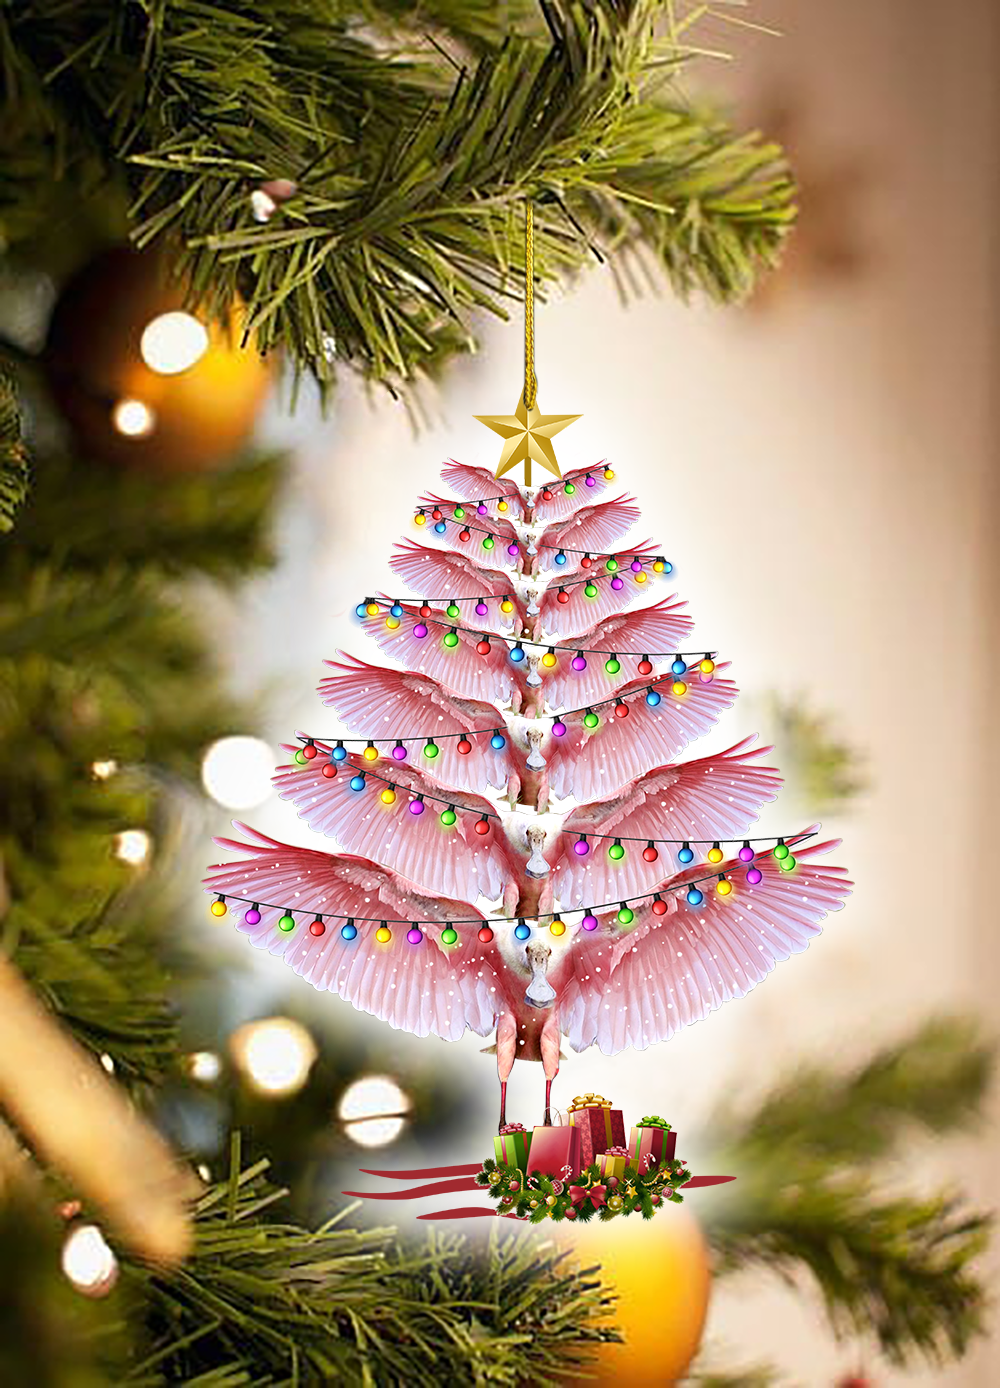 ornament-flamingo-gift-for-christmas-decorate-the-pine-tree